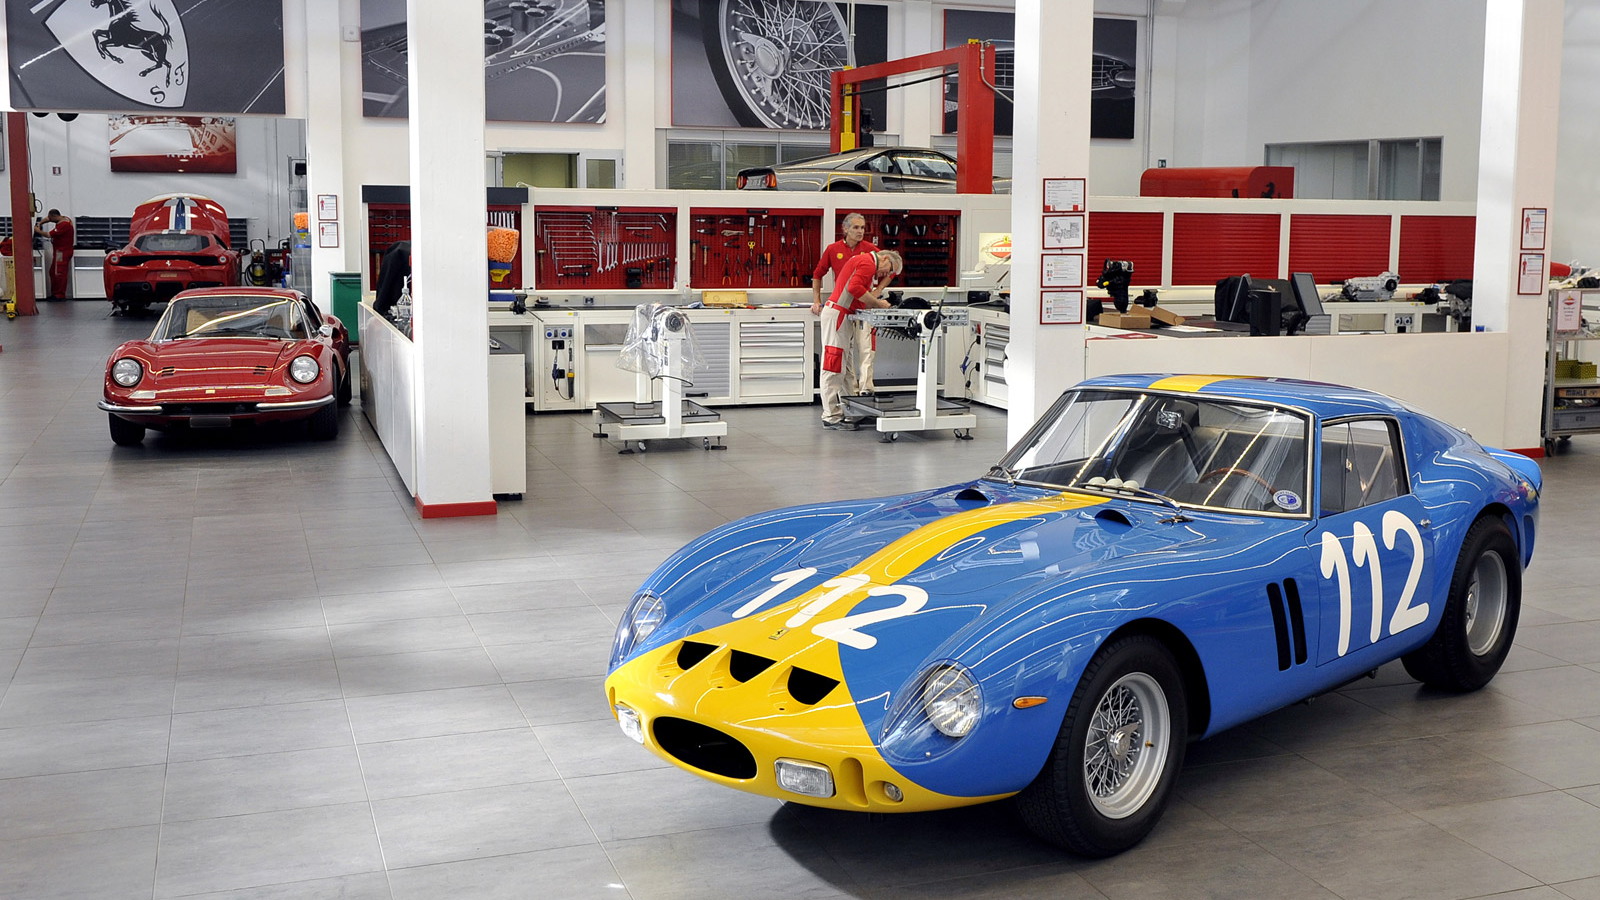 1962 Ferrari 250 GTO with chassis #3445 GT